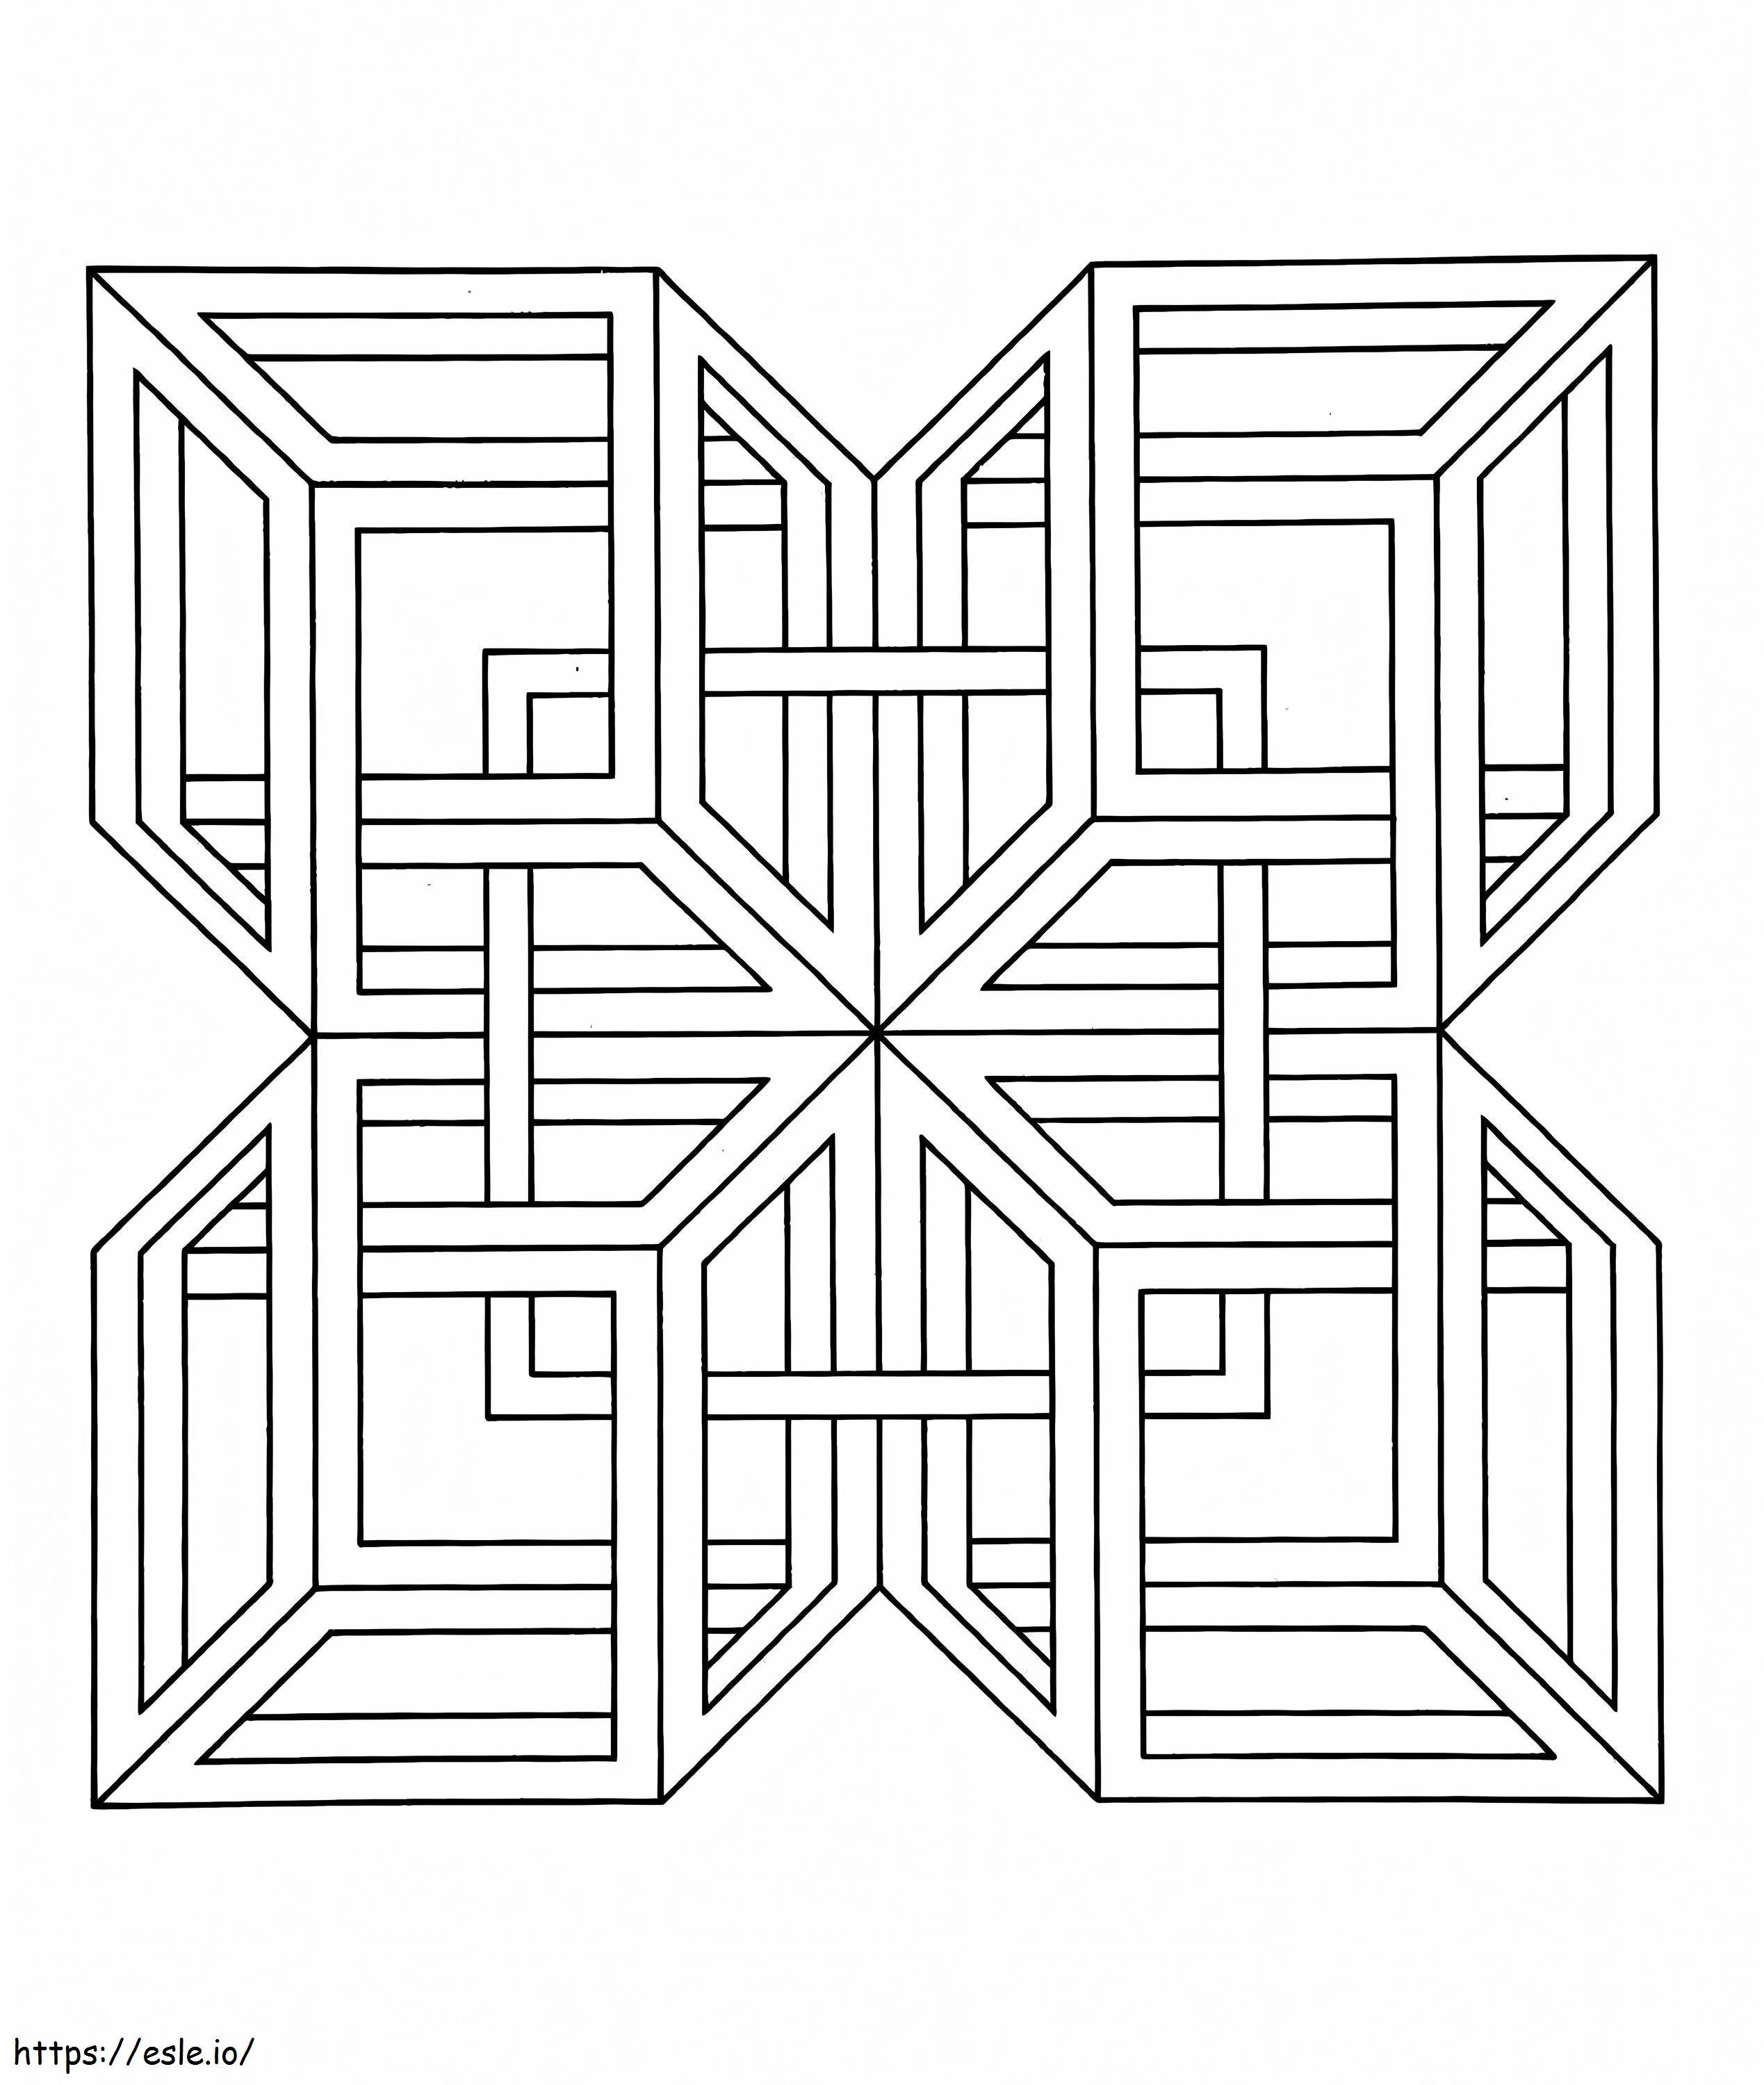 1572223148 Hard Geometric To Print Out 25781 coloring page